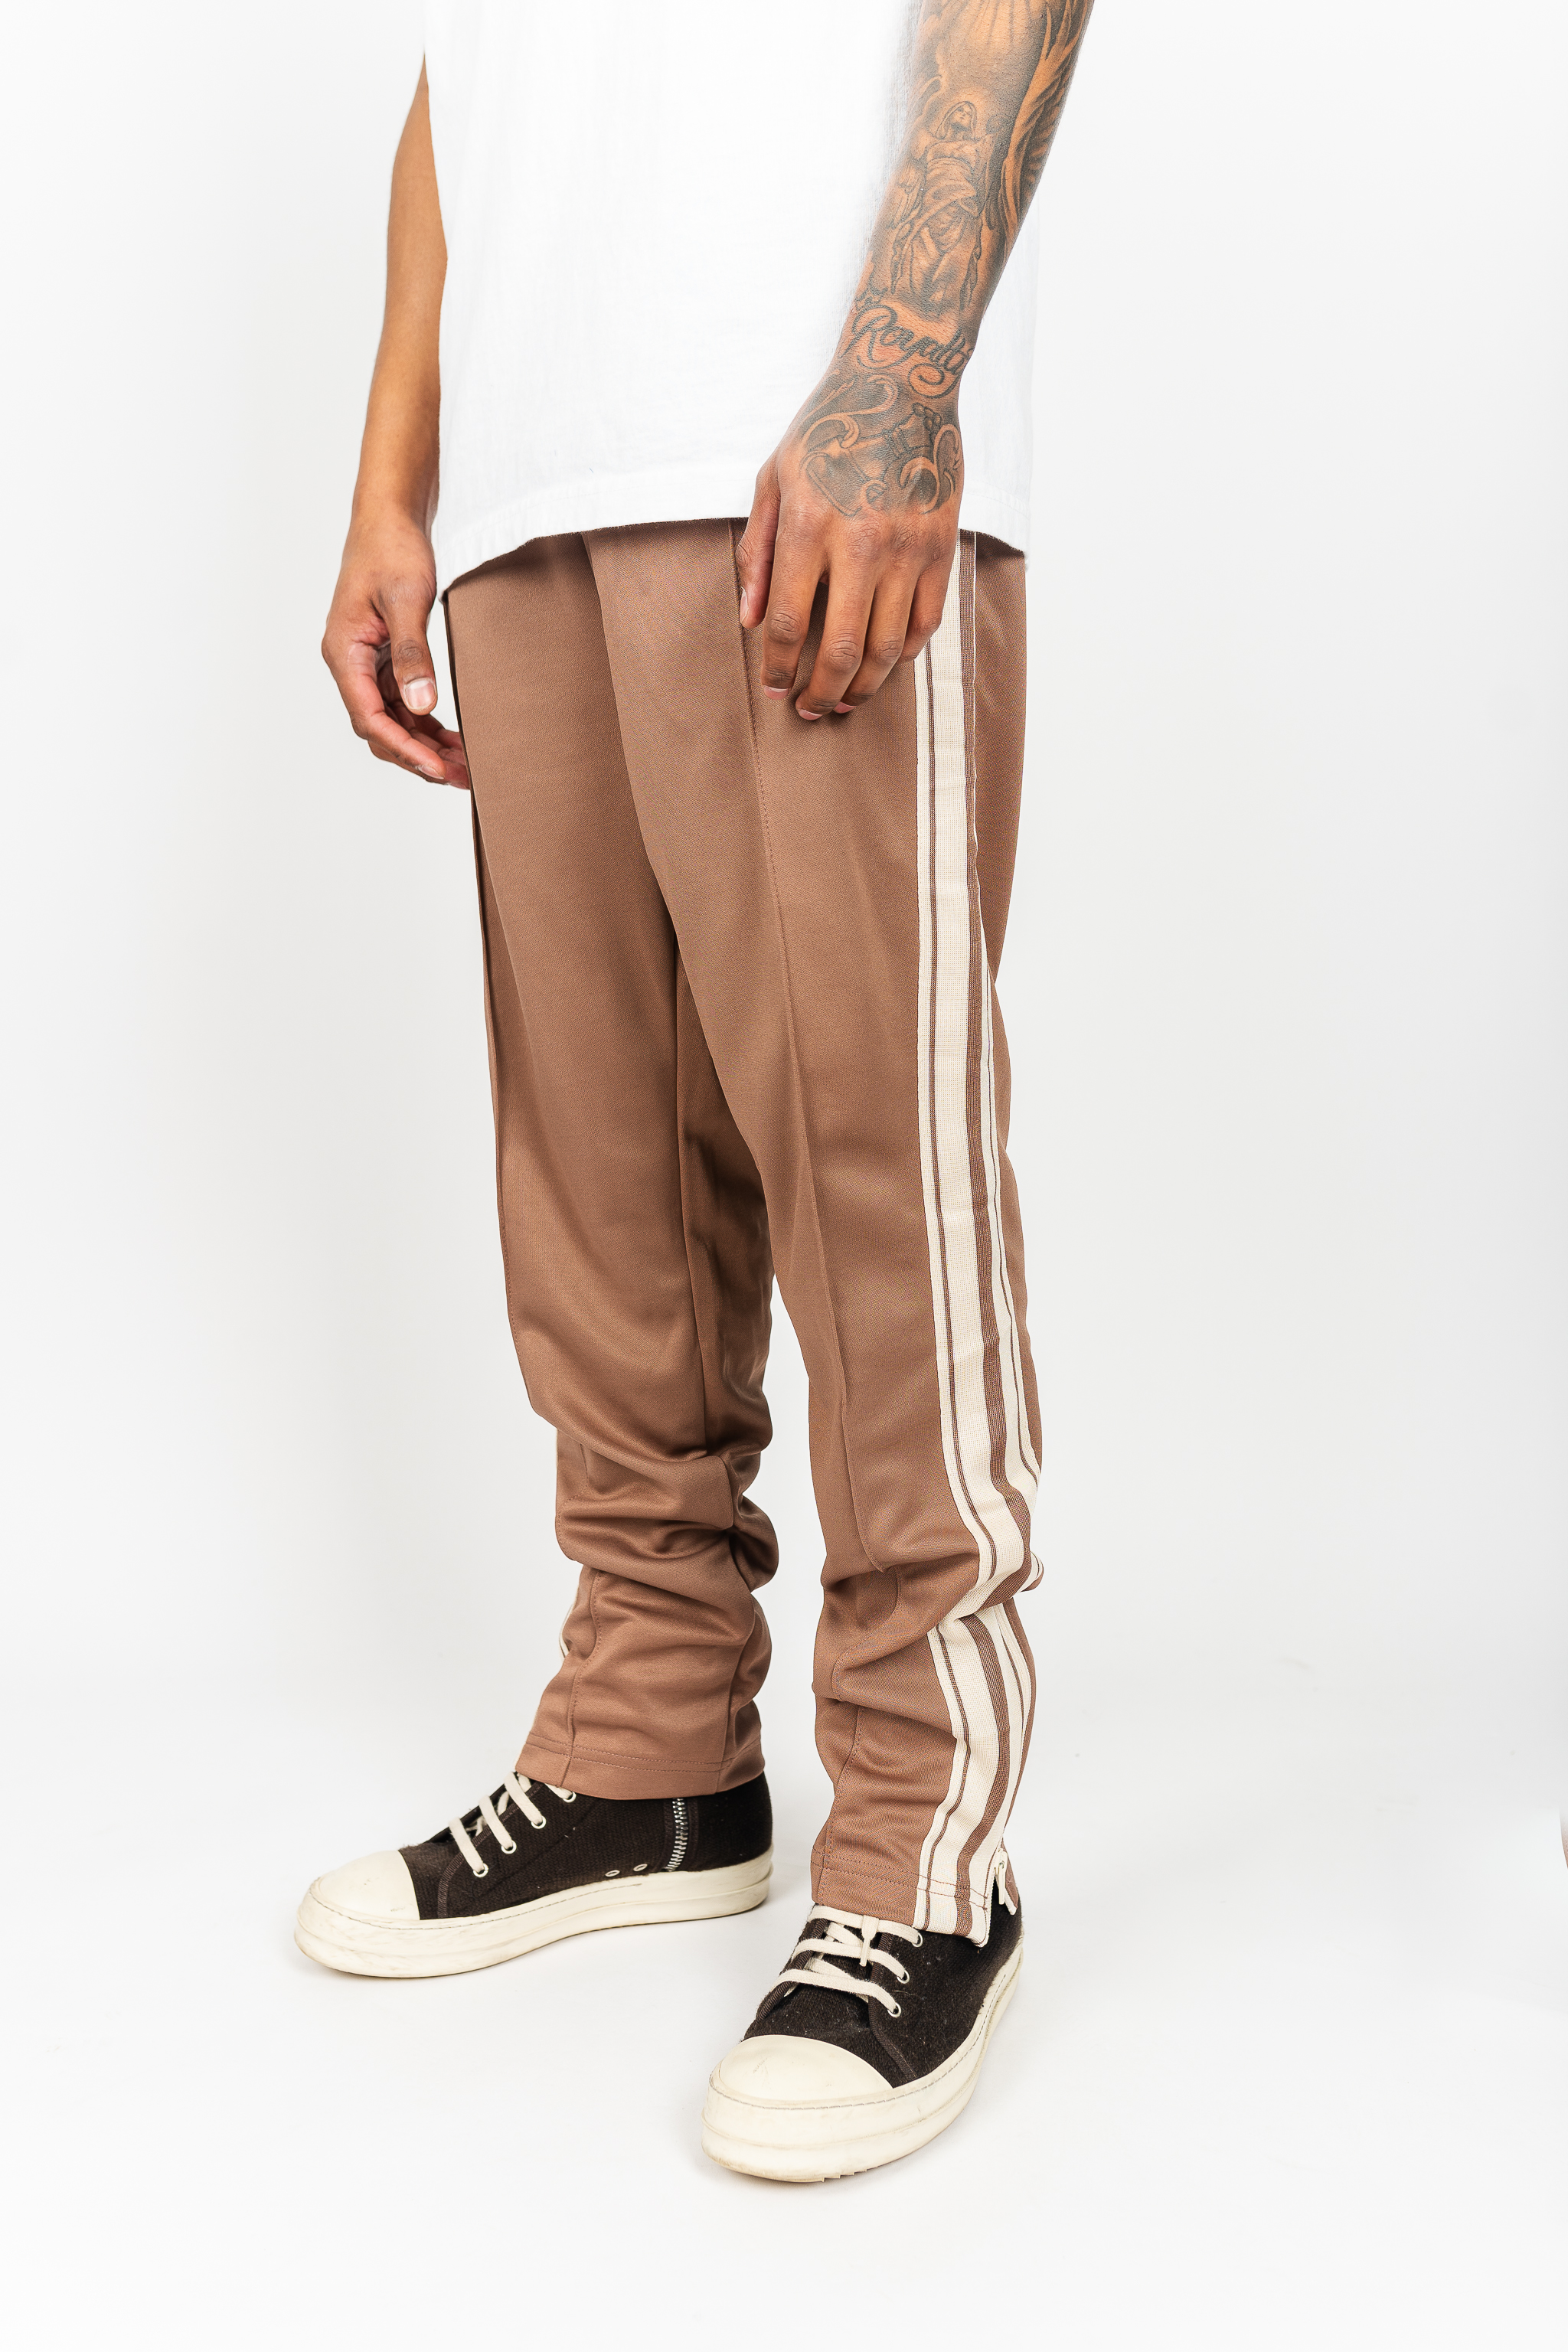 Only 45.00 usd for Superstar Track Pant - Mens Online at the Shop